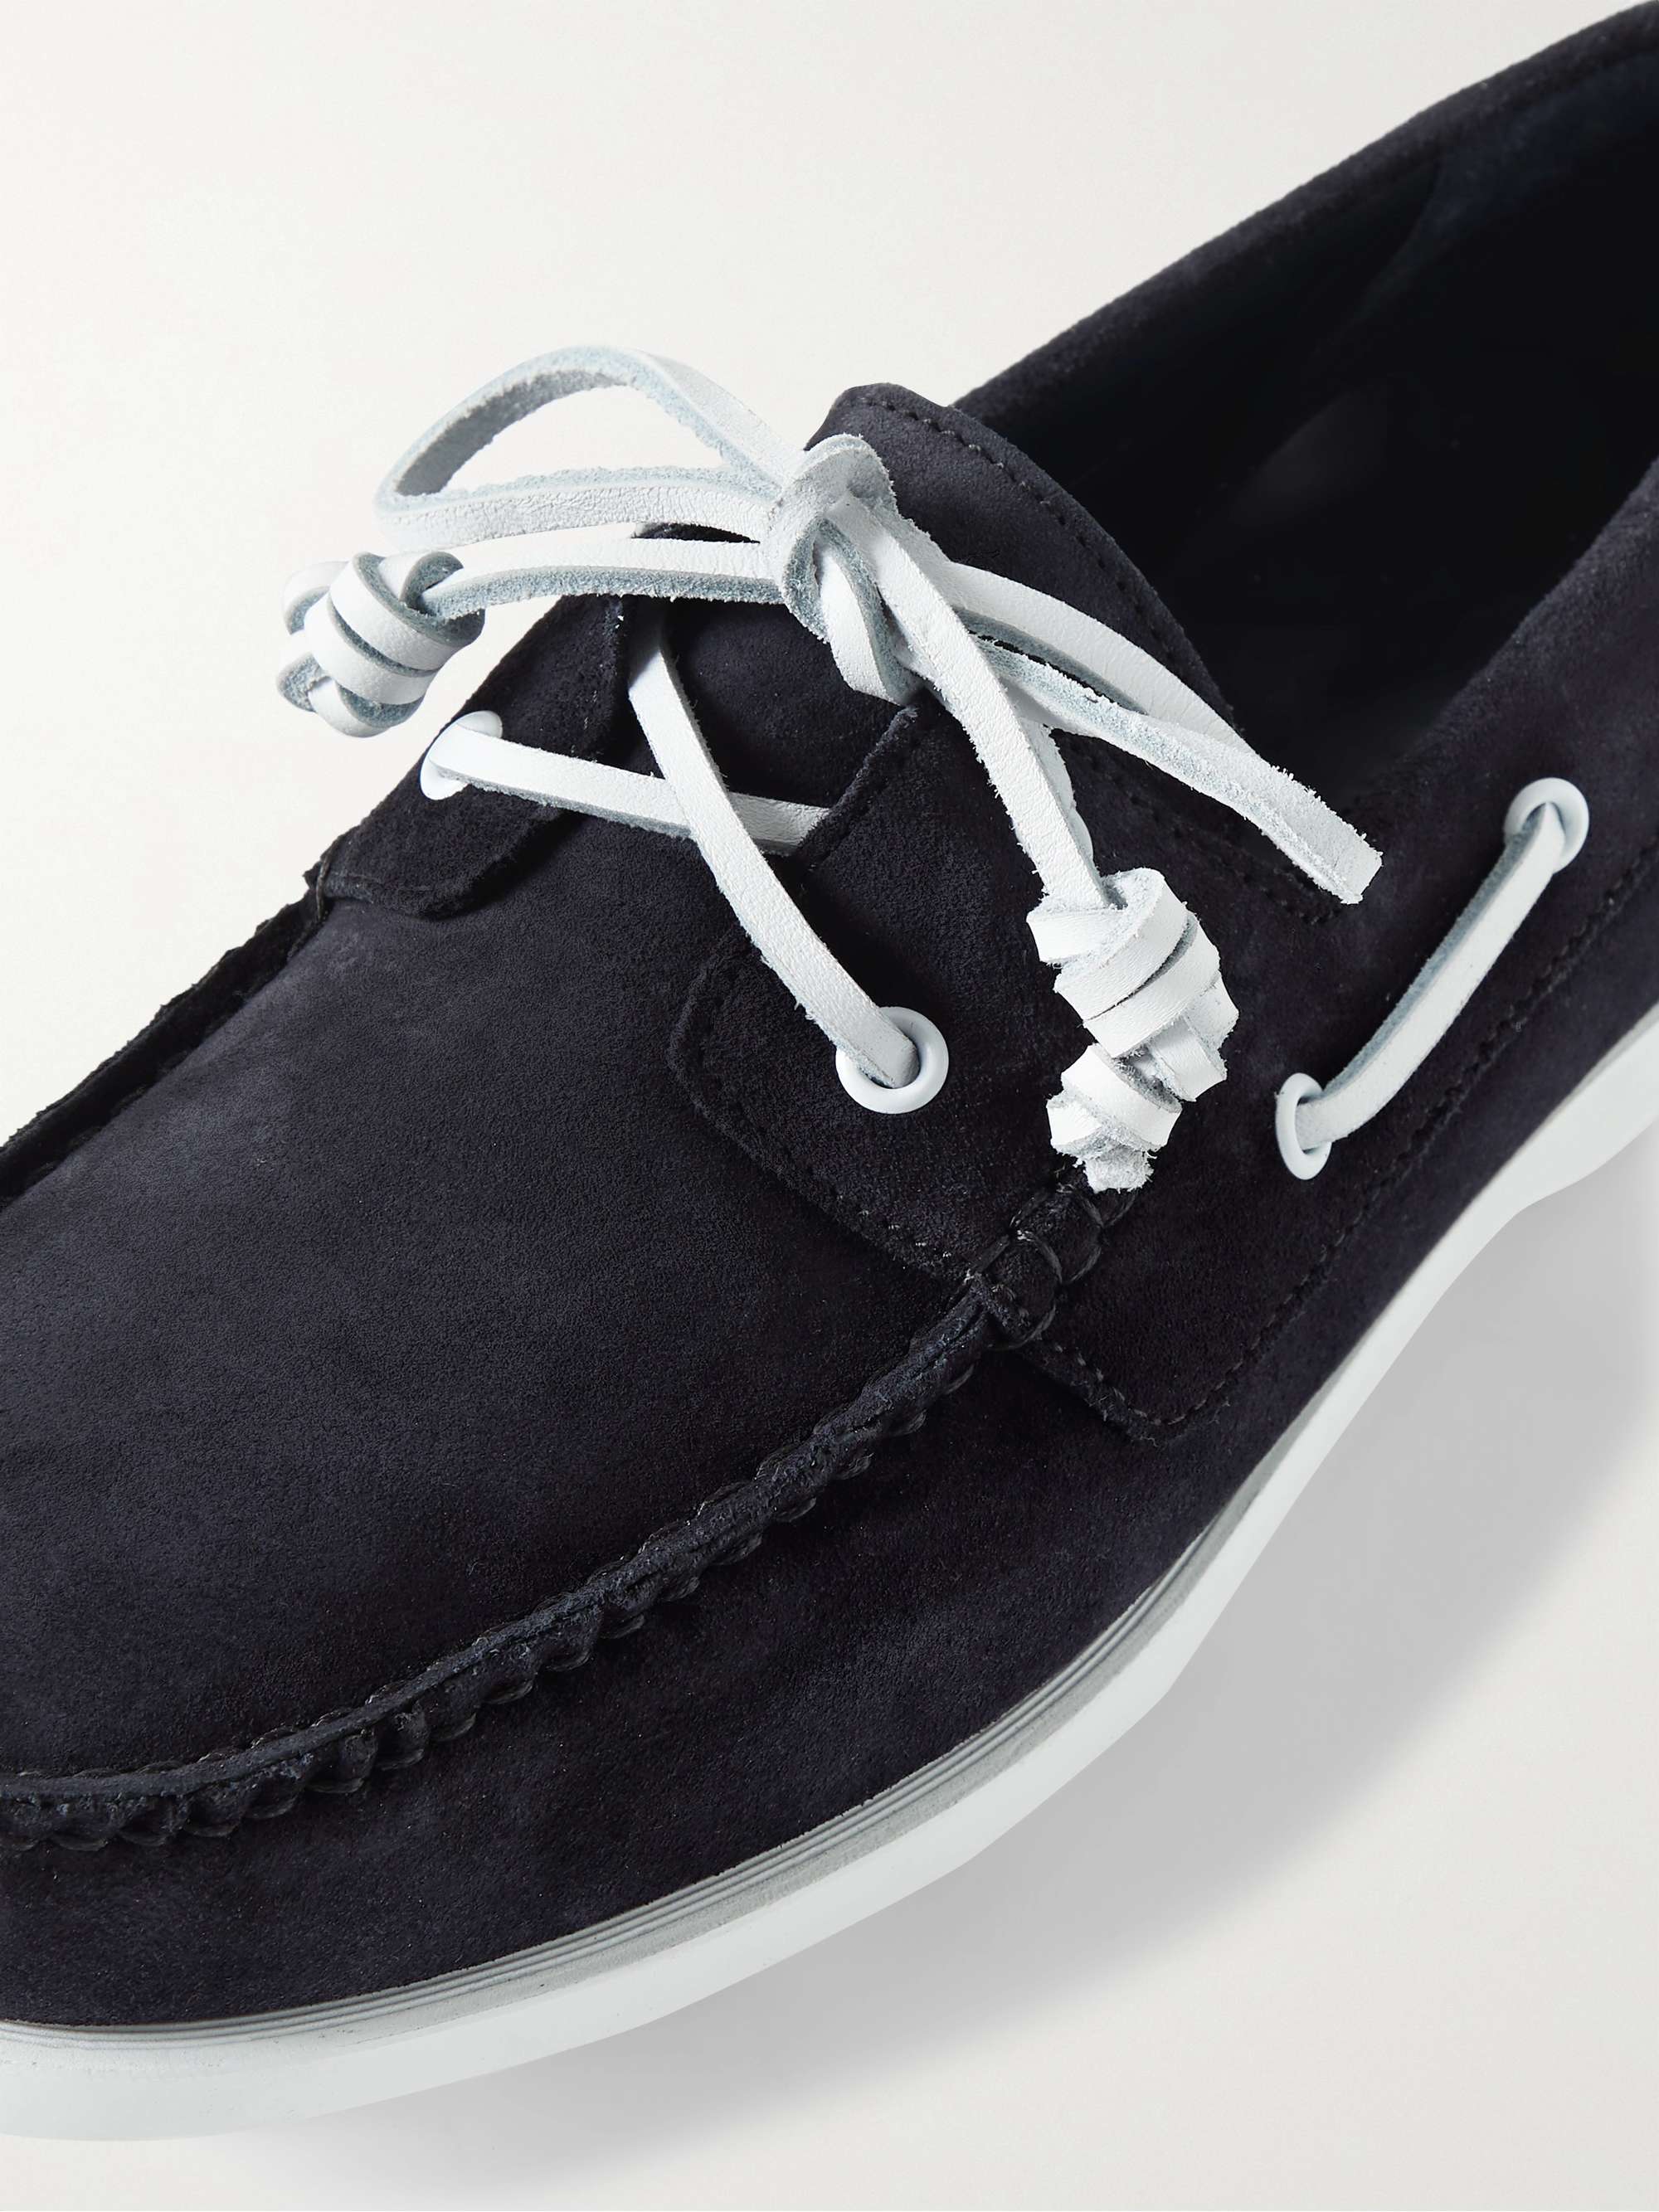 MANOLO BLAHNIK Sidmouth Suede Boat Shoes